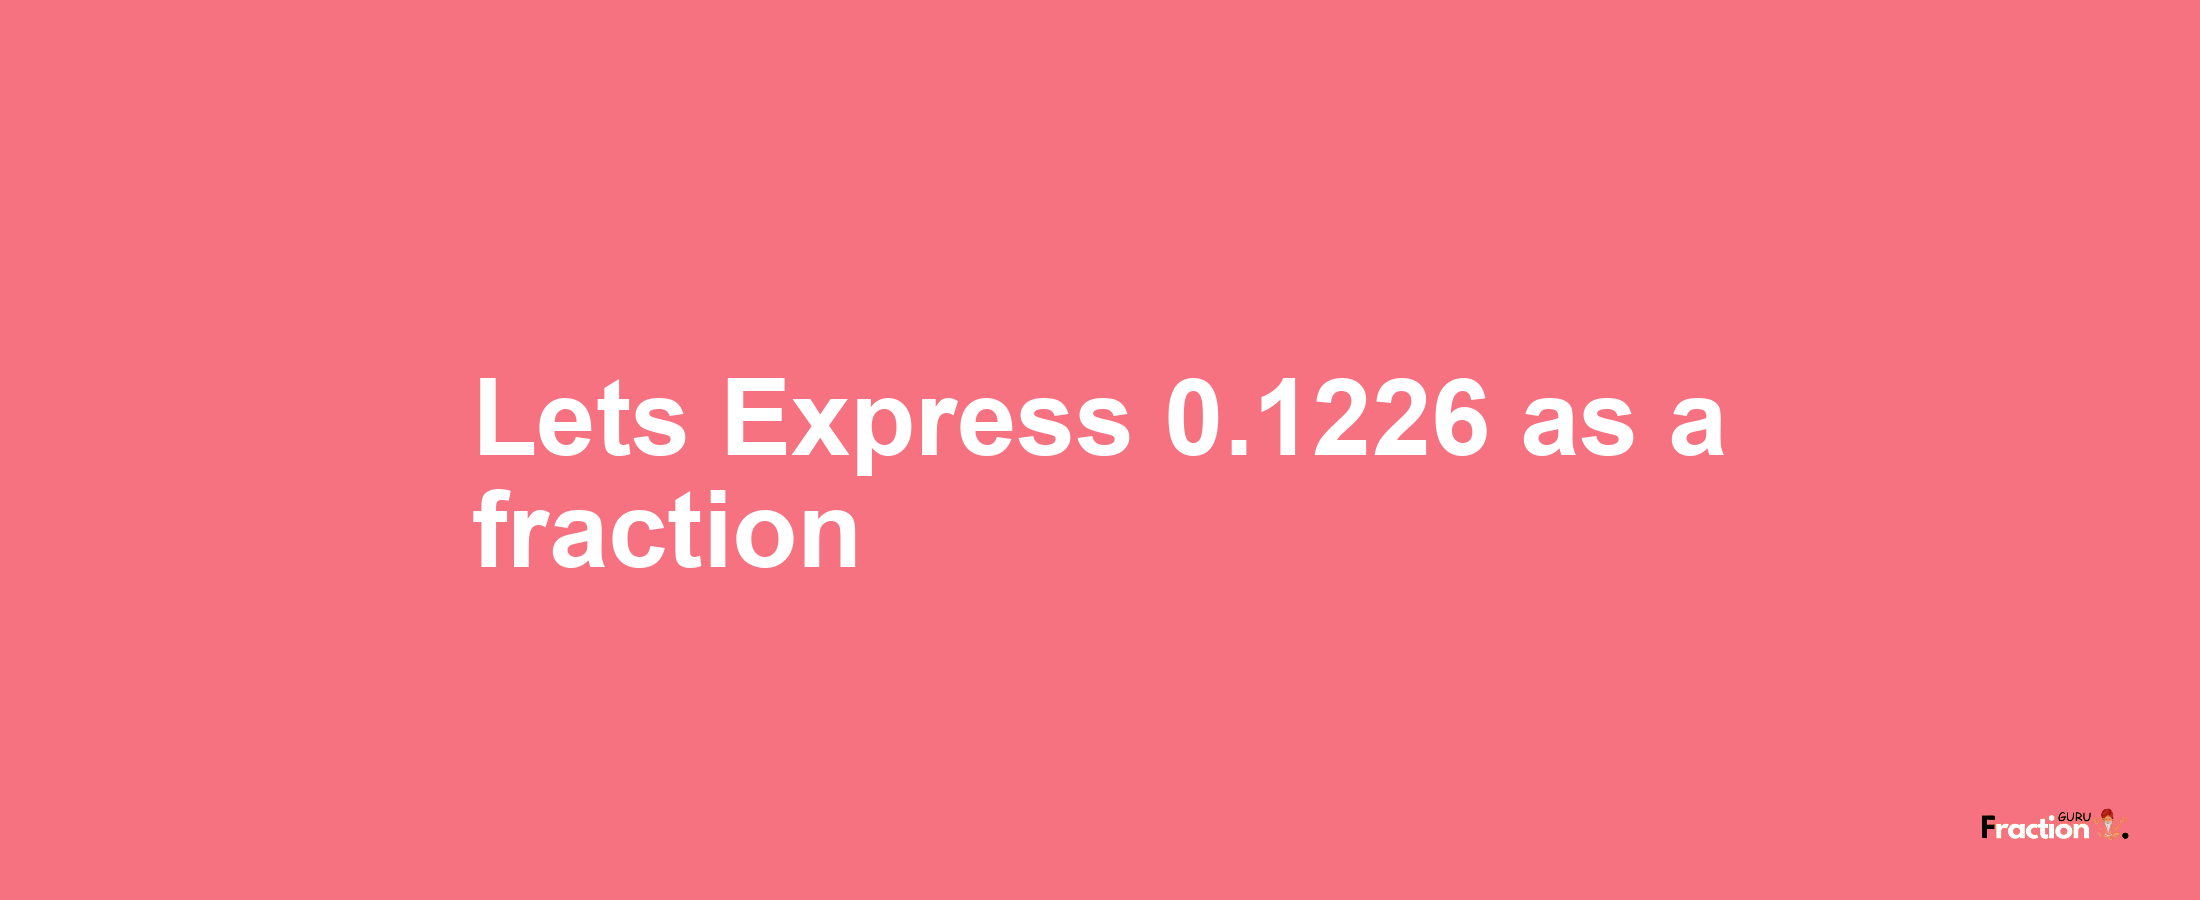 Lets Express 0.1226 as afraction